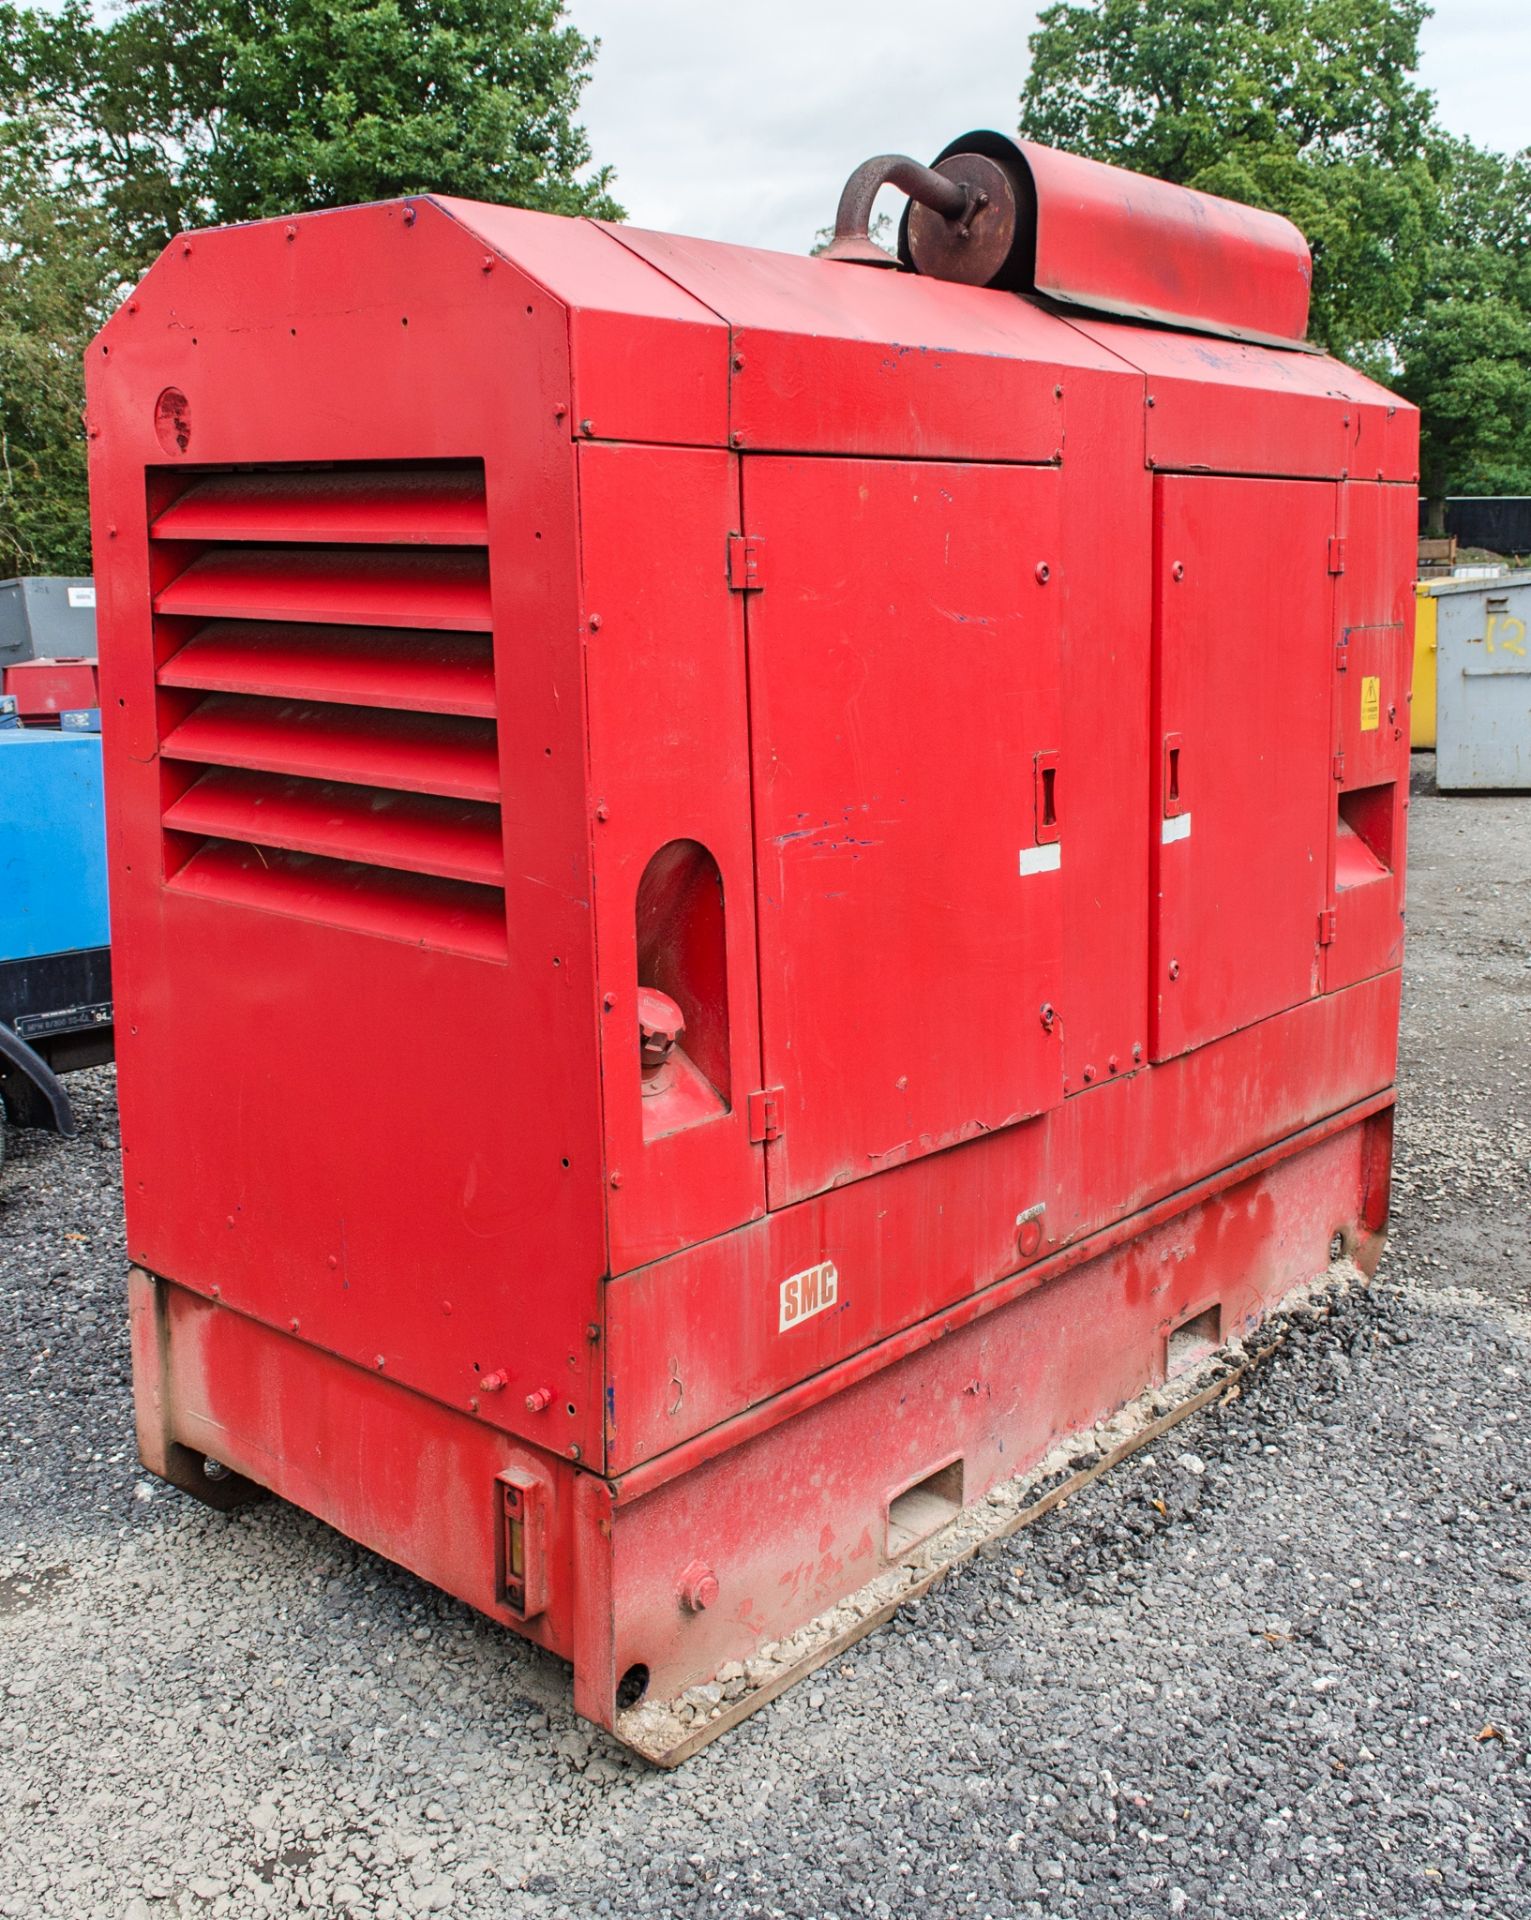 SMC G30 30 kva diesel driven generator S/N: G30092263 Recorded Hours: 8389 - Image 2 of 9